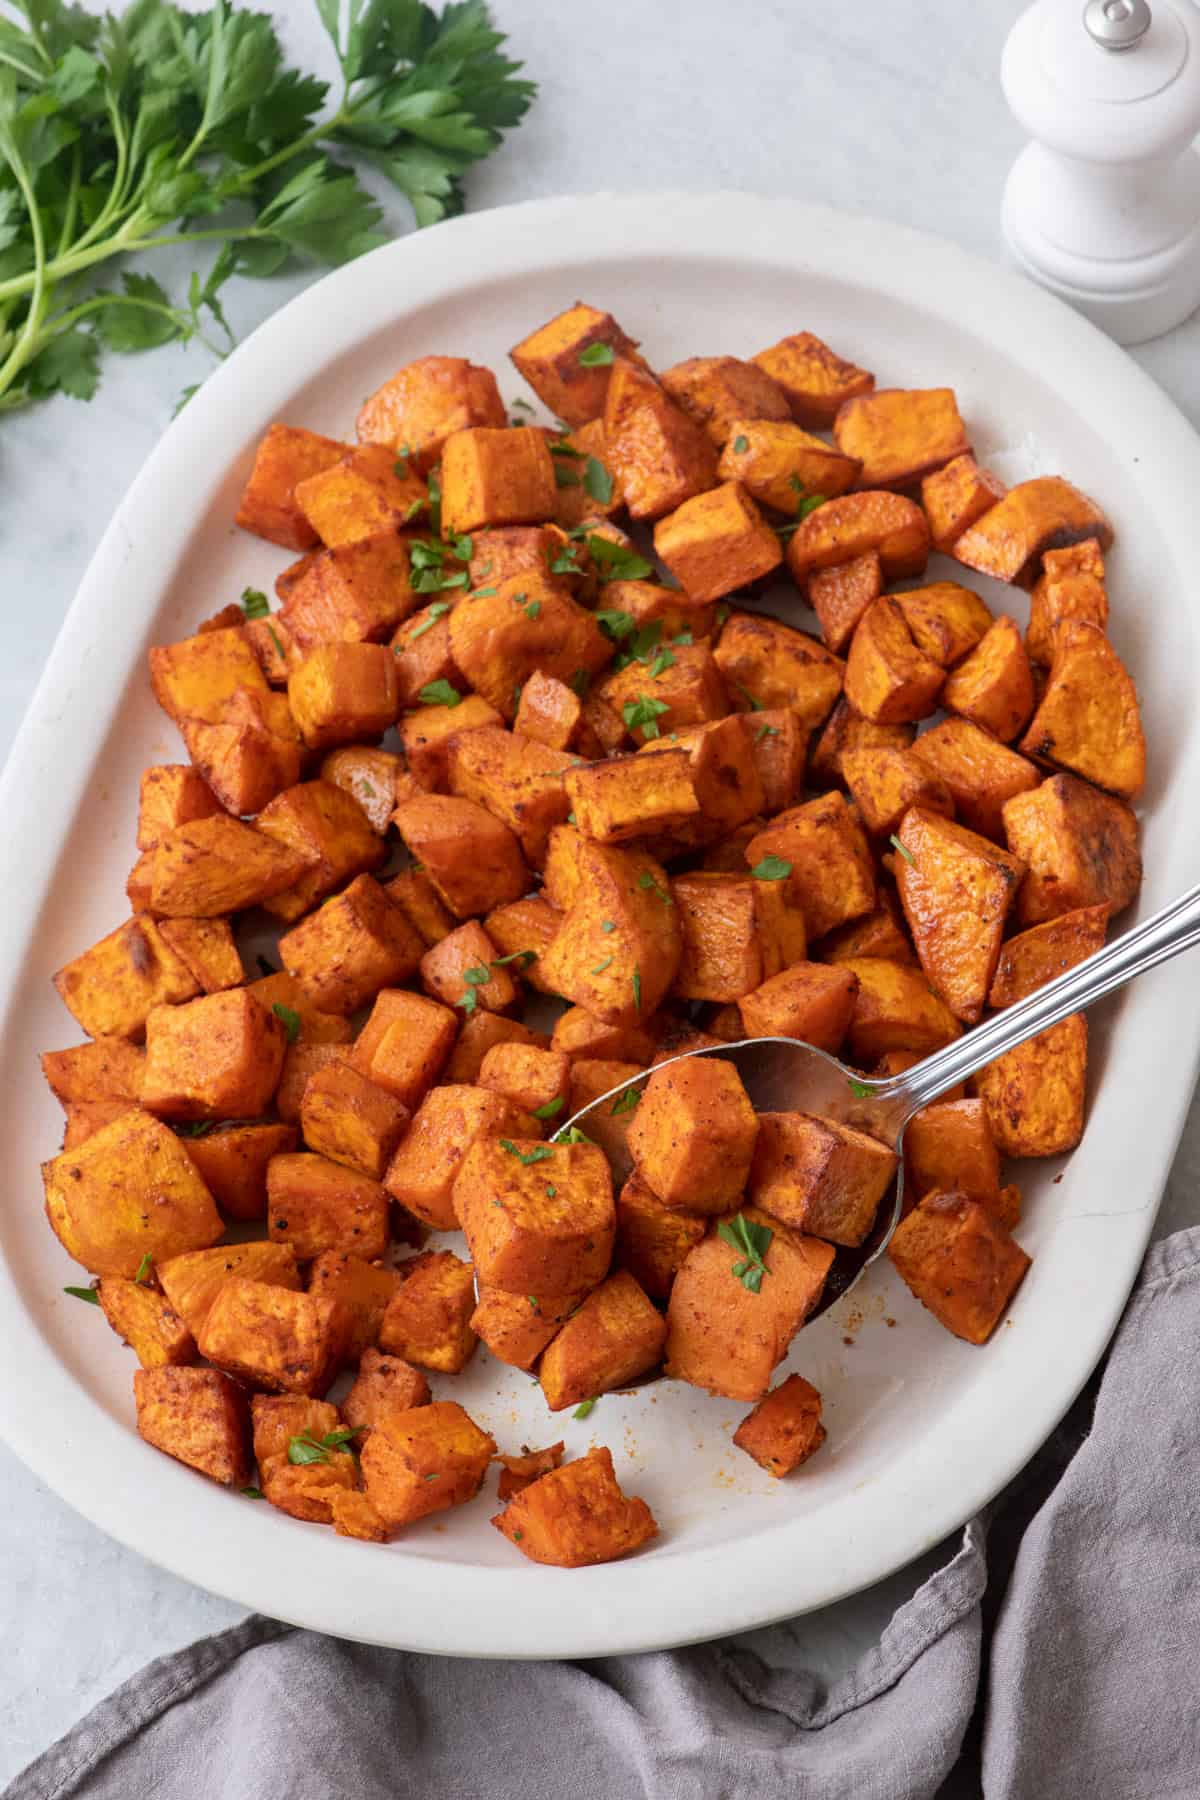 Diced roasted sweet potatoes on large white oval serving dish garnished with fresh parsley and a spoon scooping some.